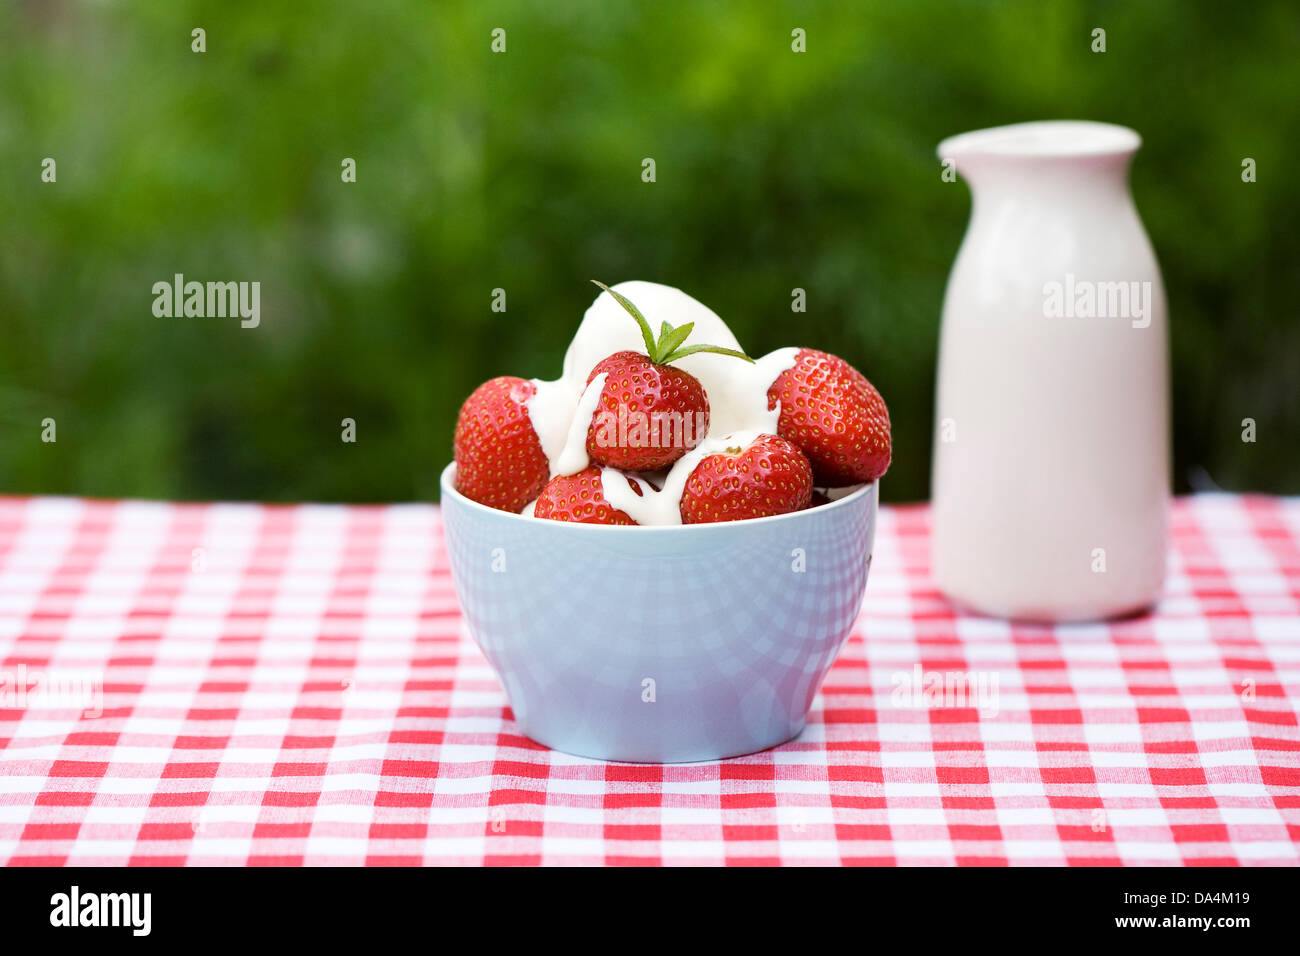 Bowl of freshly picked strawberries and cream. Stock Photo